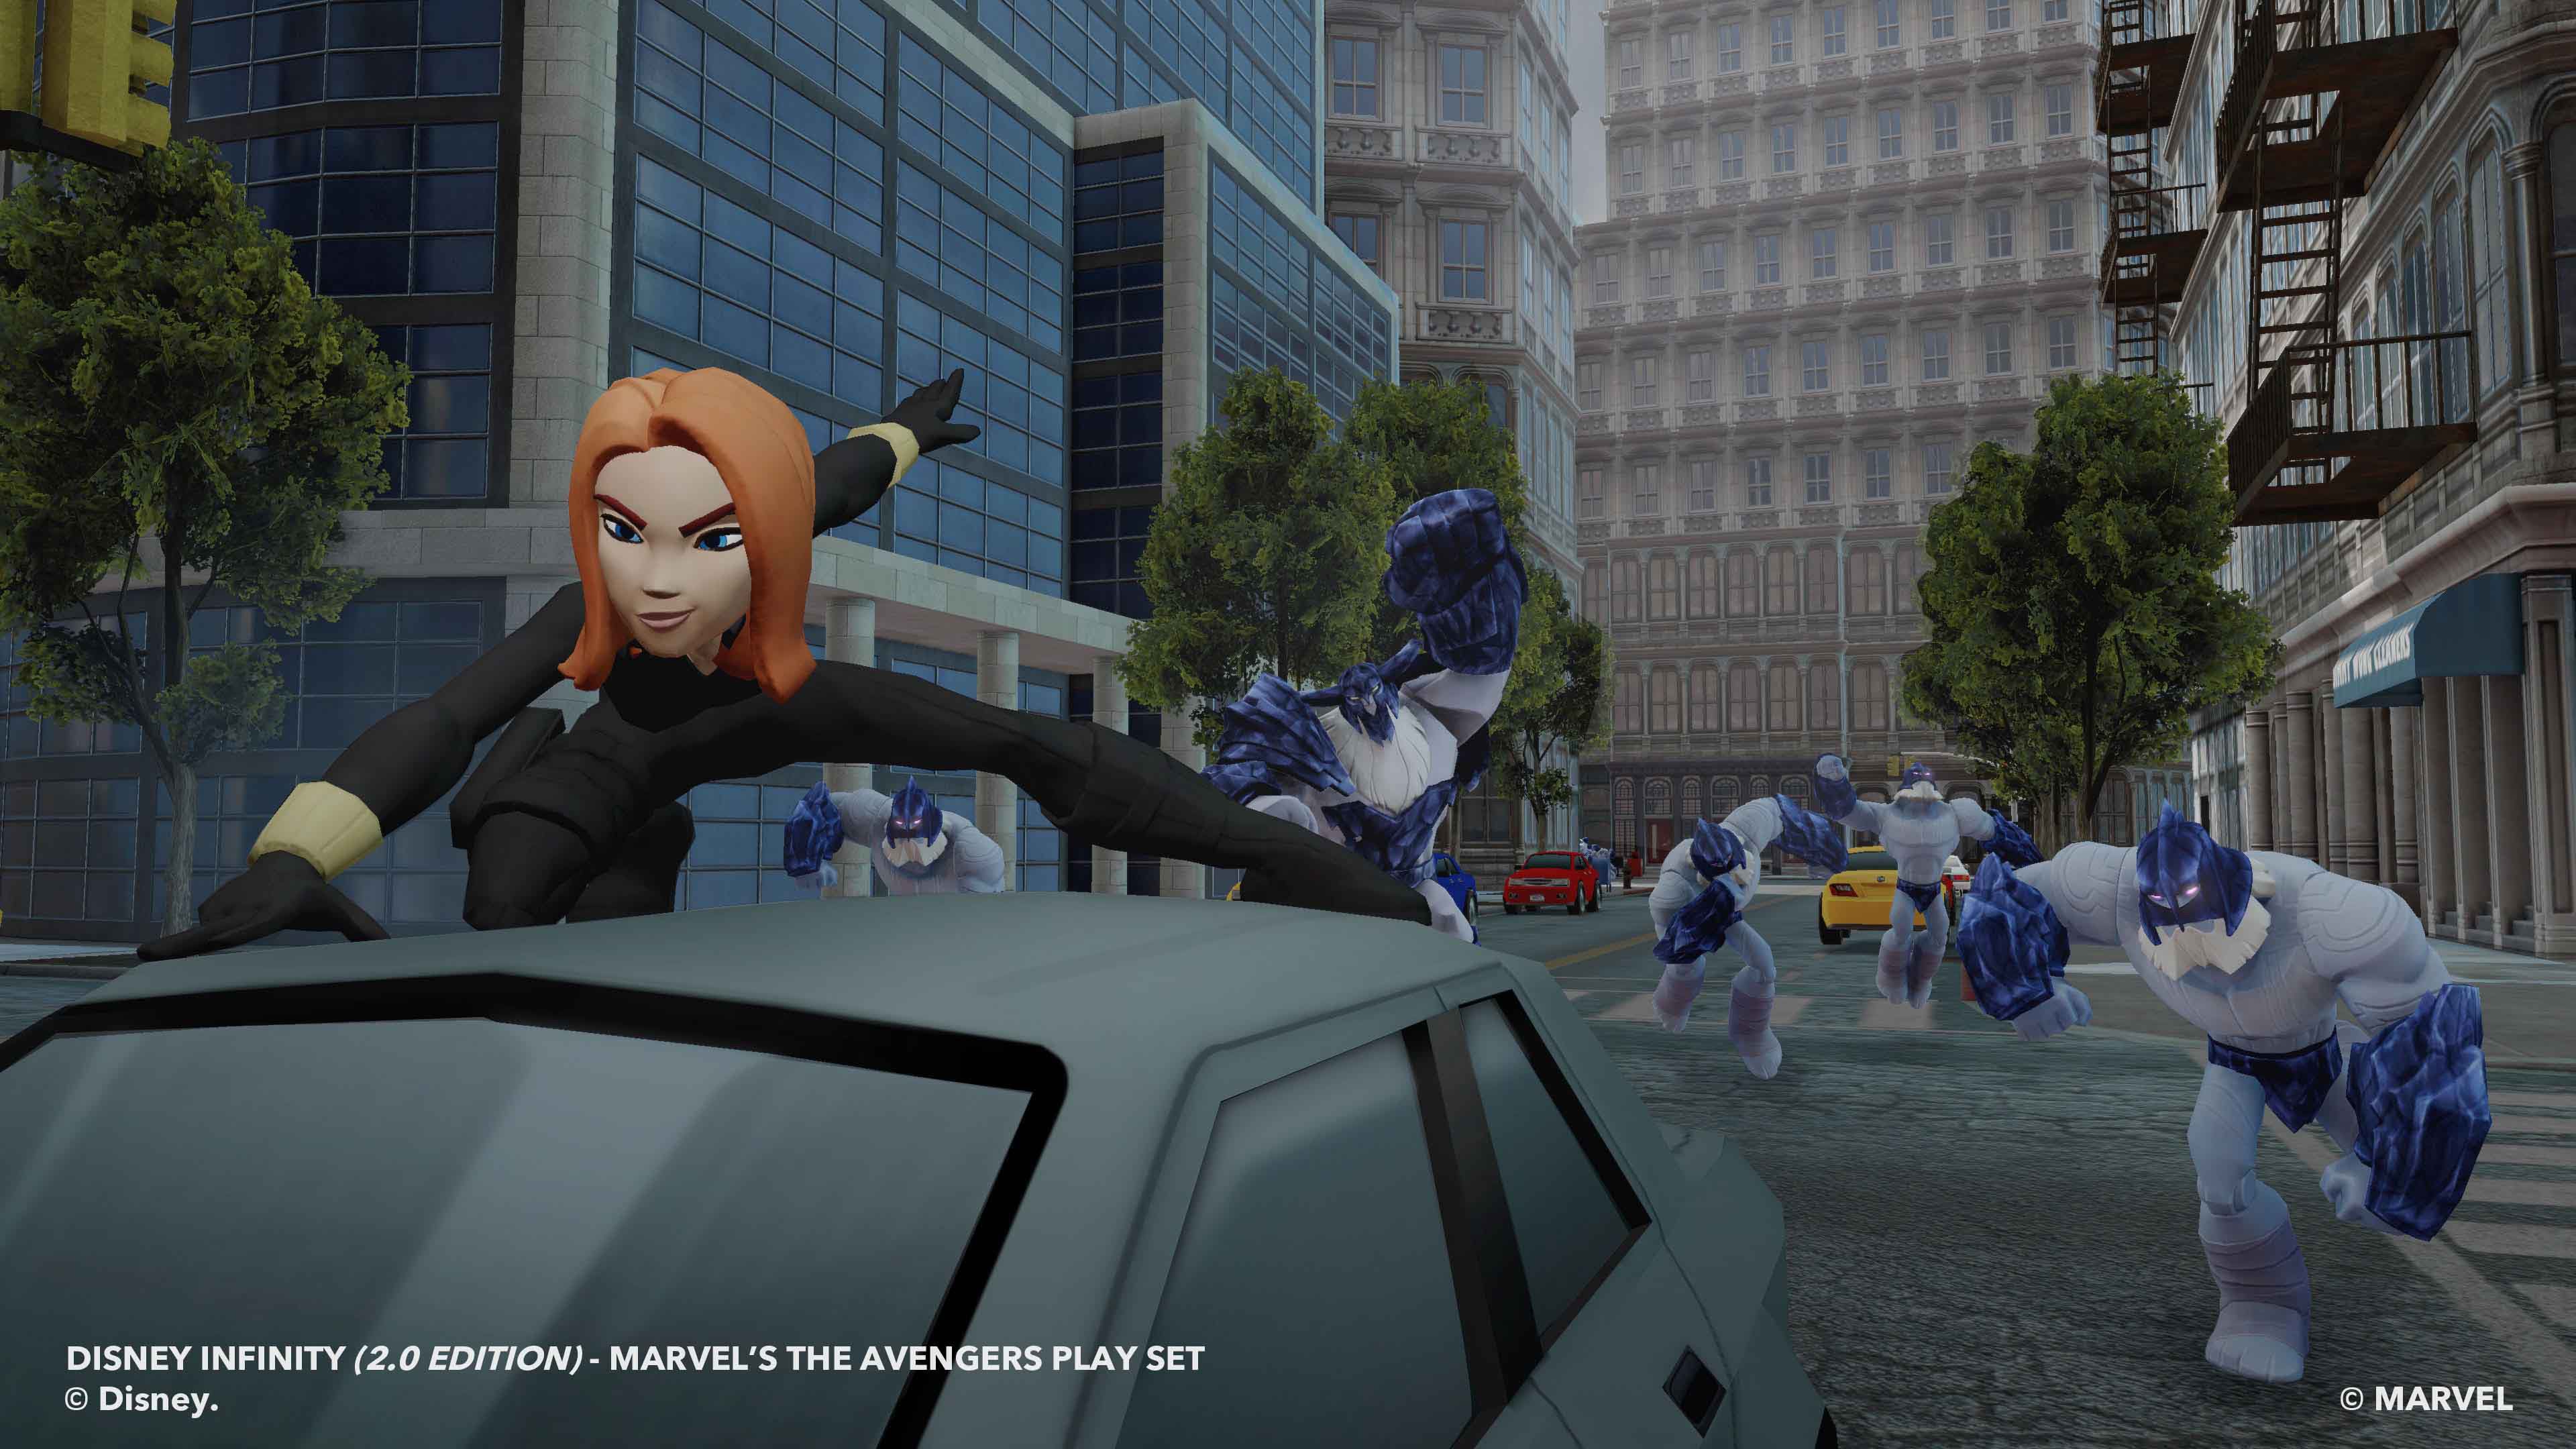 disney infinity 2 0 marvel super heroes to launch in autumn with new figure collection image 2